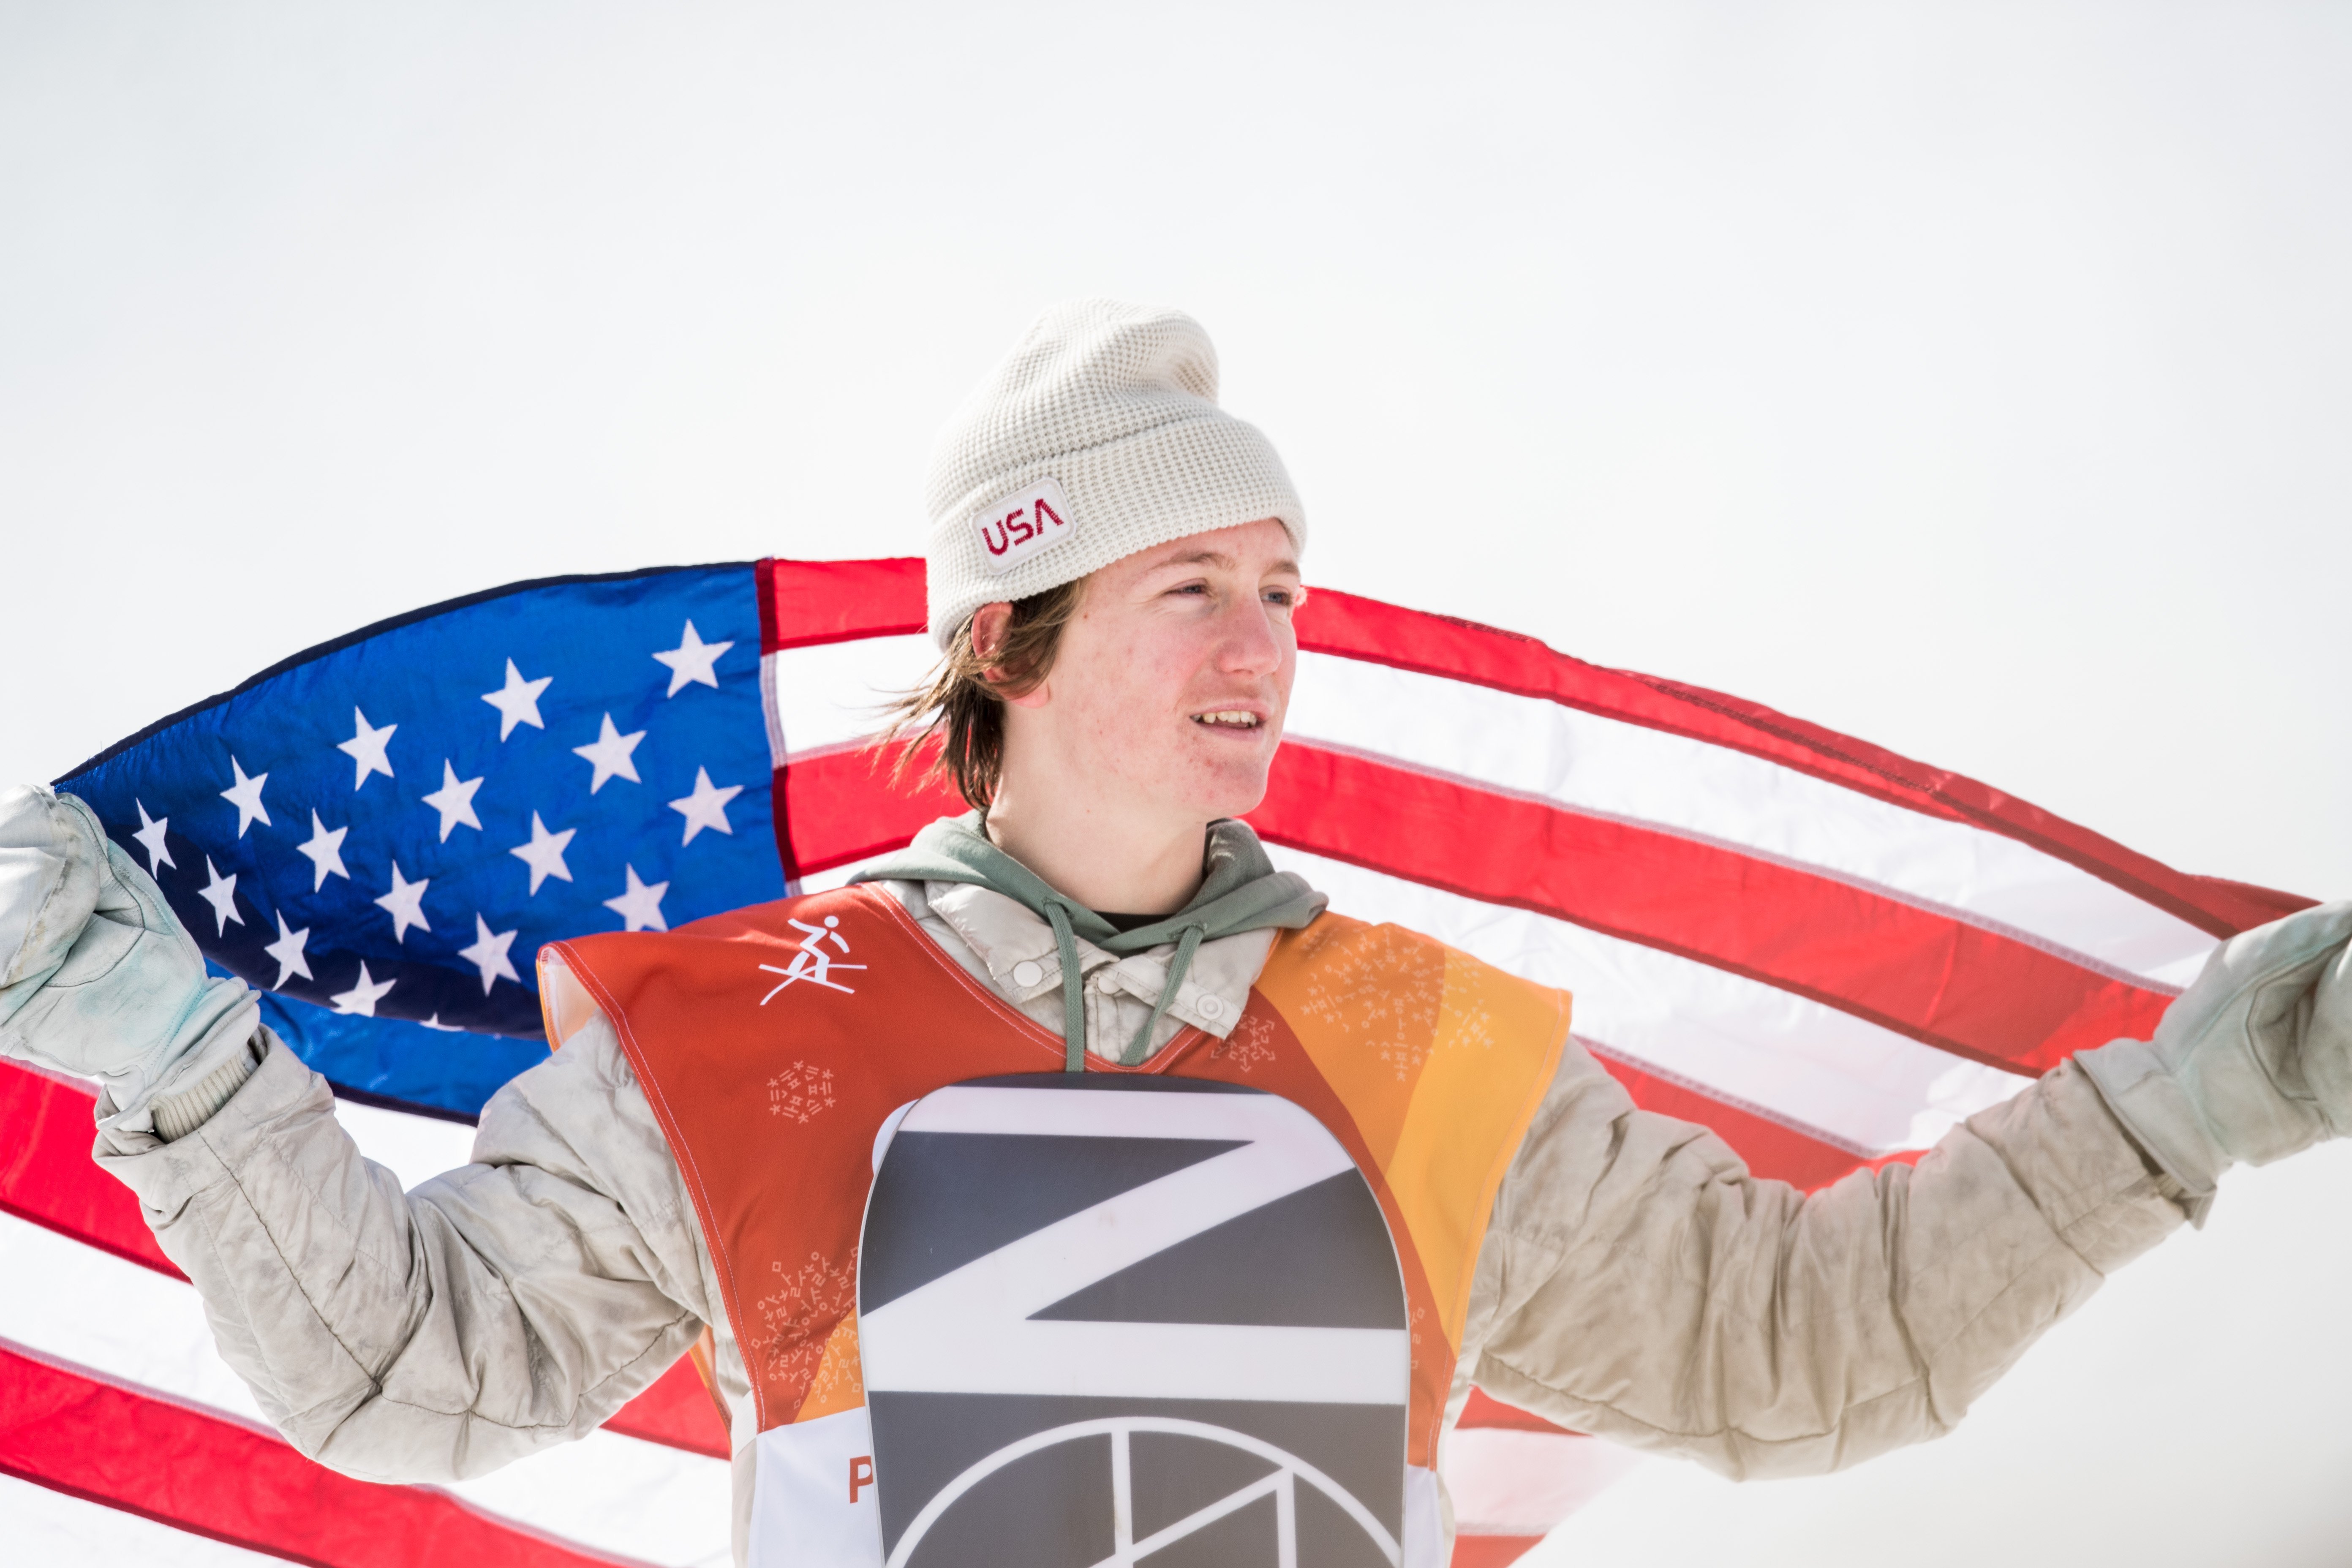 Why Red Gerard Might Not Want to Be the Next Shaun White - WSJ